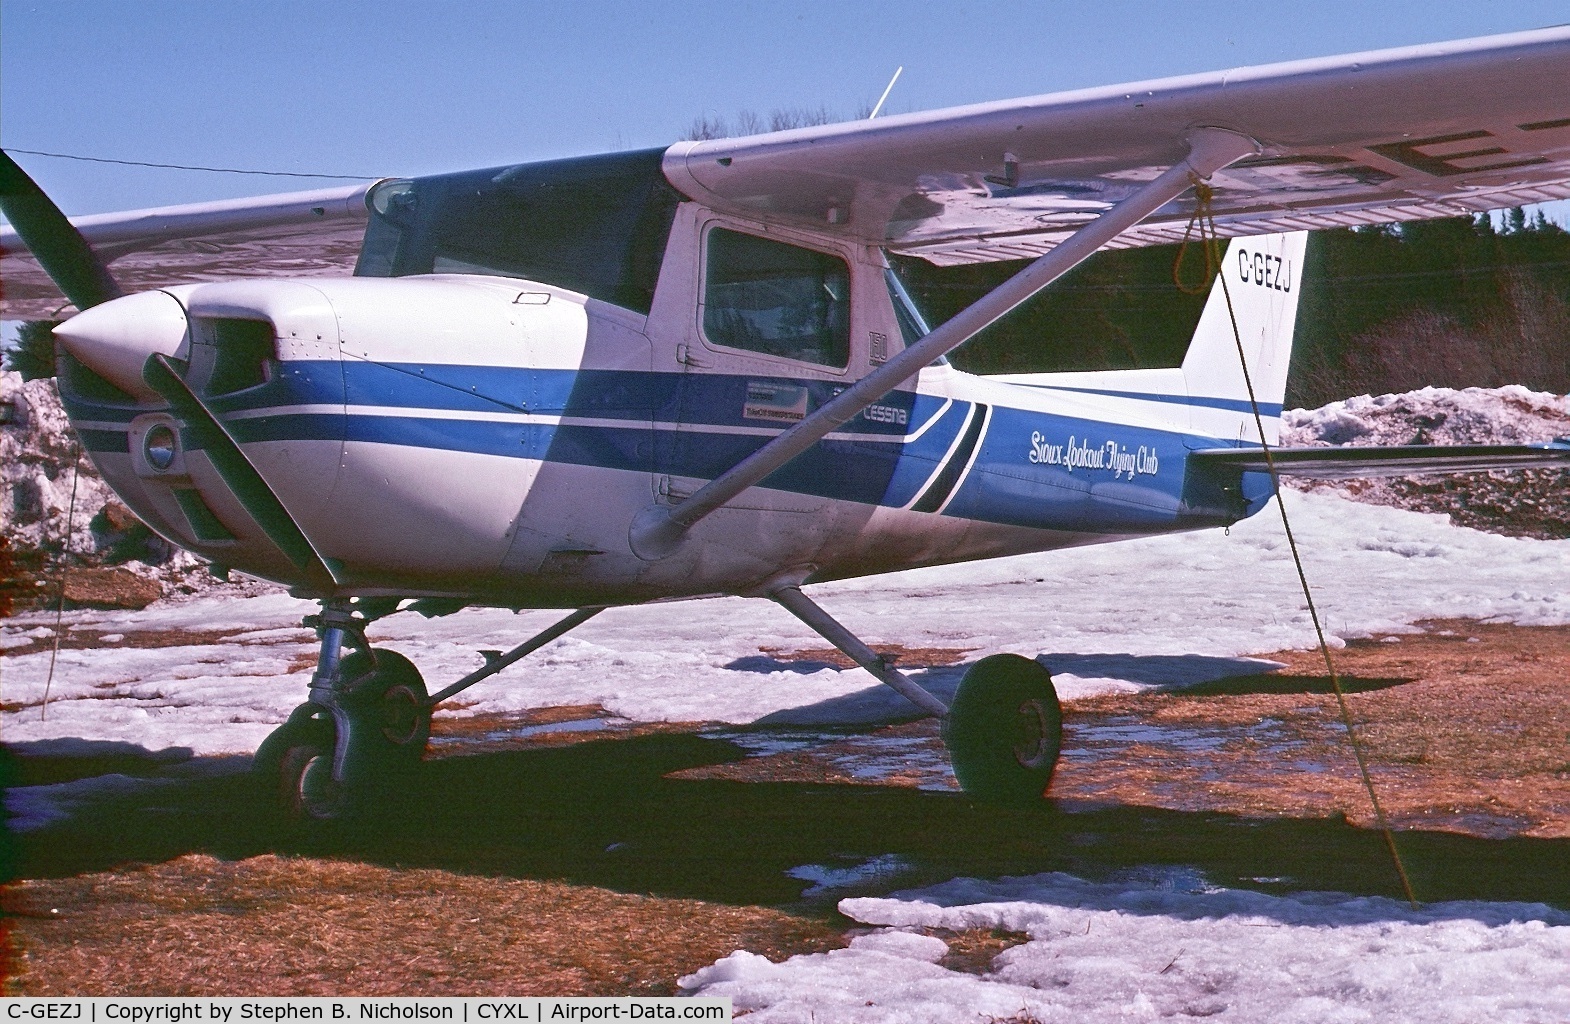 C-GEZJ, Cessna 150L C/N 15075708, Photo circa 1978 while operated by Sioux Lookout Flying Club